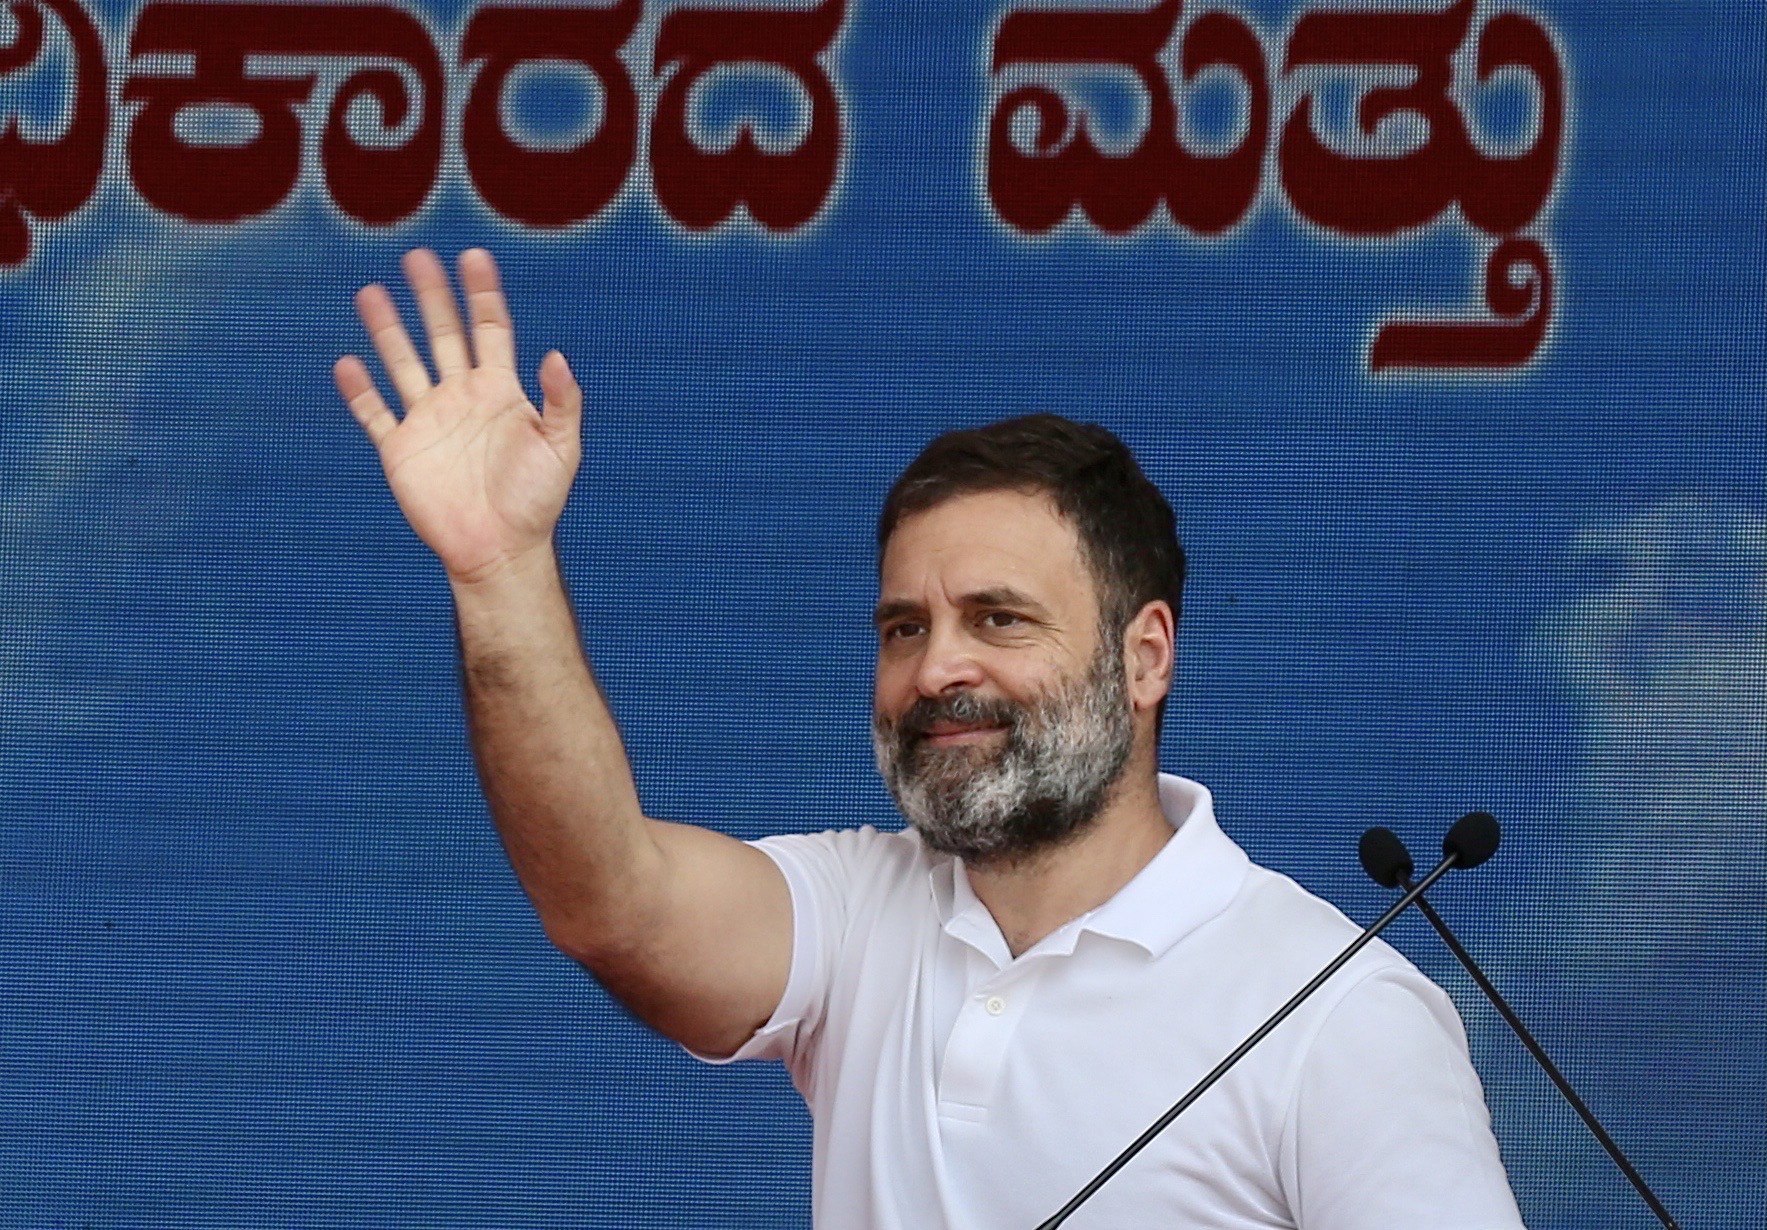 Rahul Gandhi has often been derided on social media by BJP sympathisers as Pappu – a person who knows little, inept and bumbling. Photo: EPA-EFE